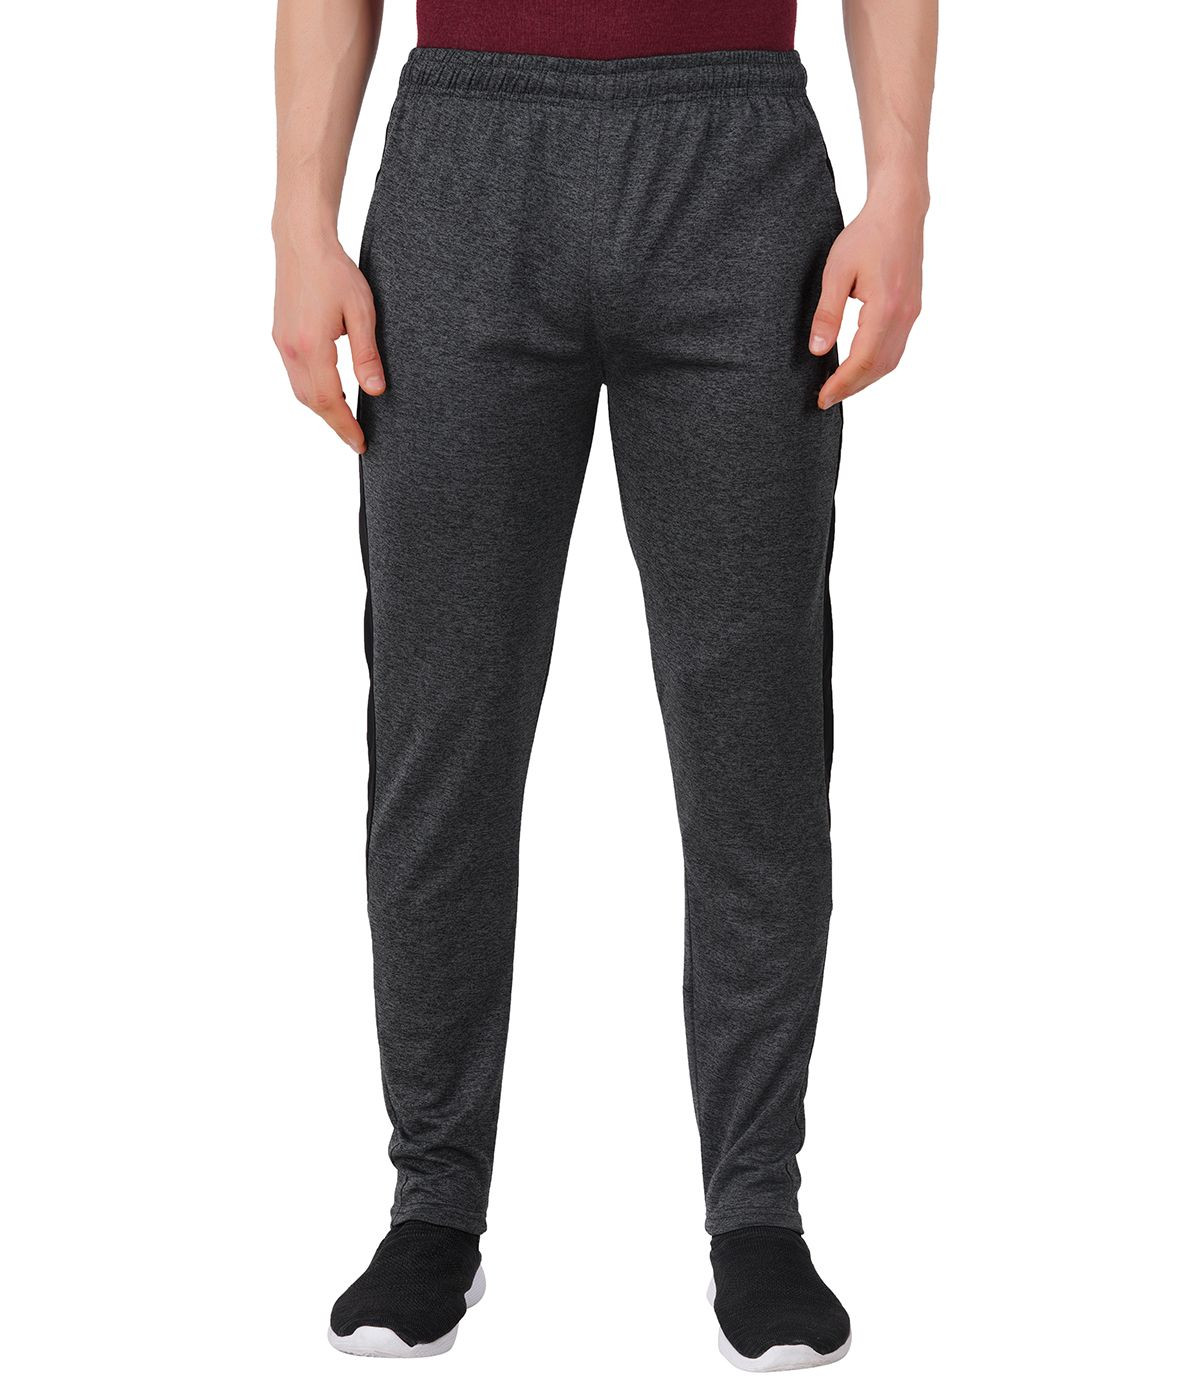 Cotton Blend Charcoal Grey Stylish Joggers Track Pant For Men